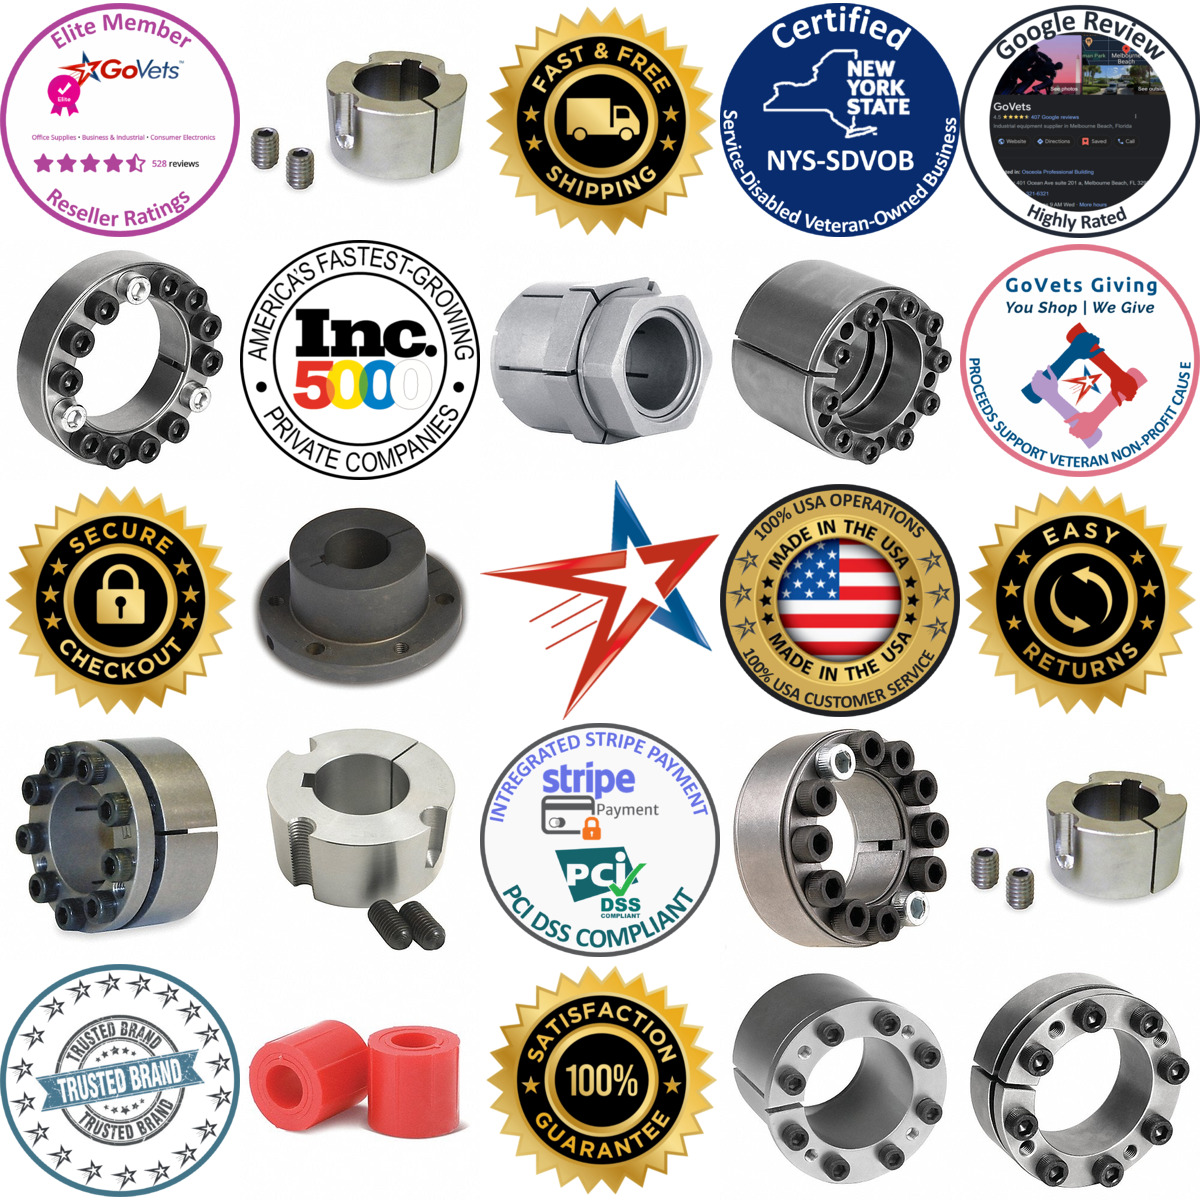 A selection of Bushings products on GoVets